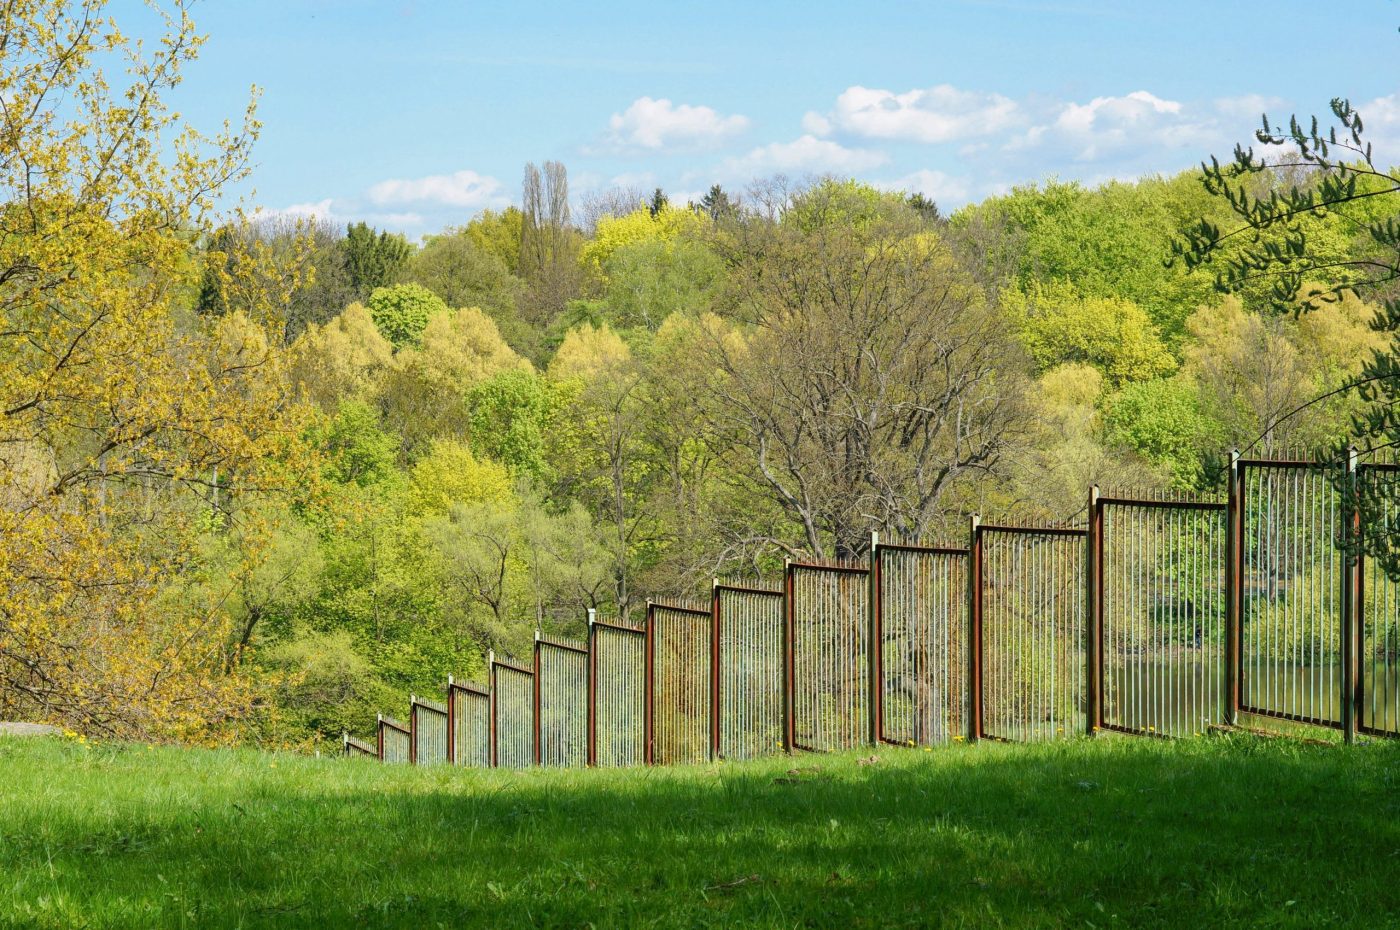 metal-fence-in-the-garden-with-trees-in-the-background